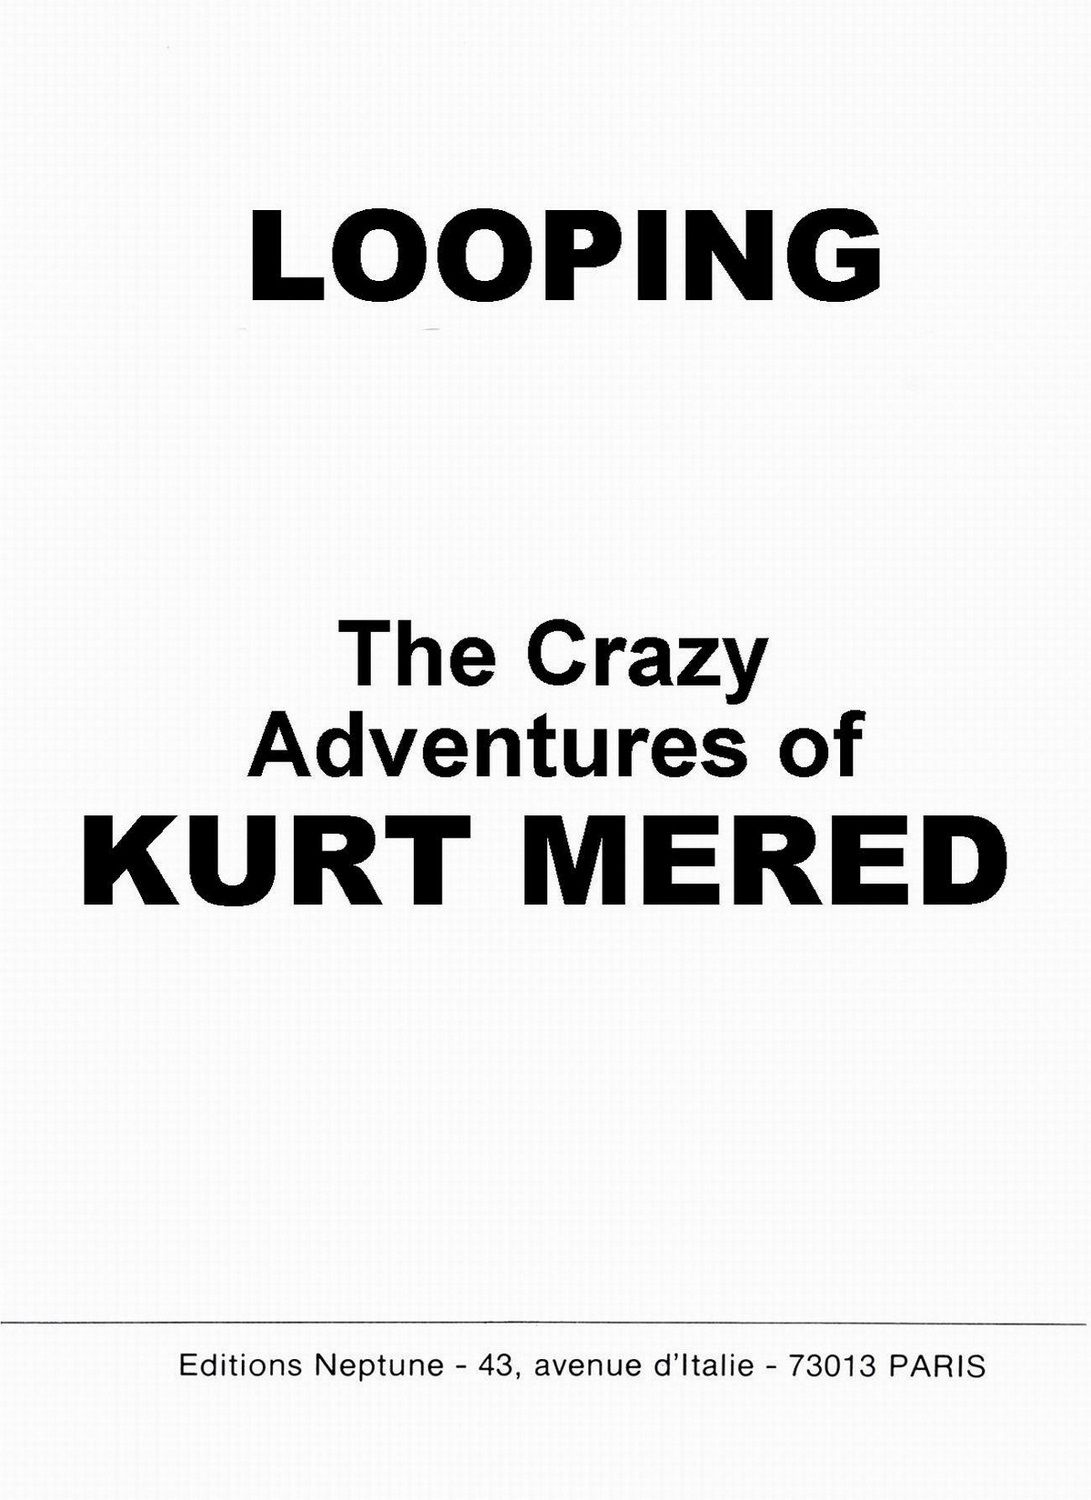 The Crazy Adventures of Kurt Mered (Looping) page 2